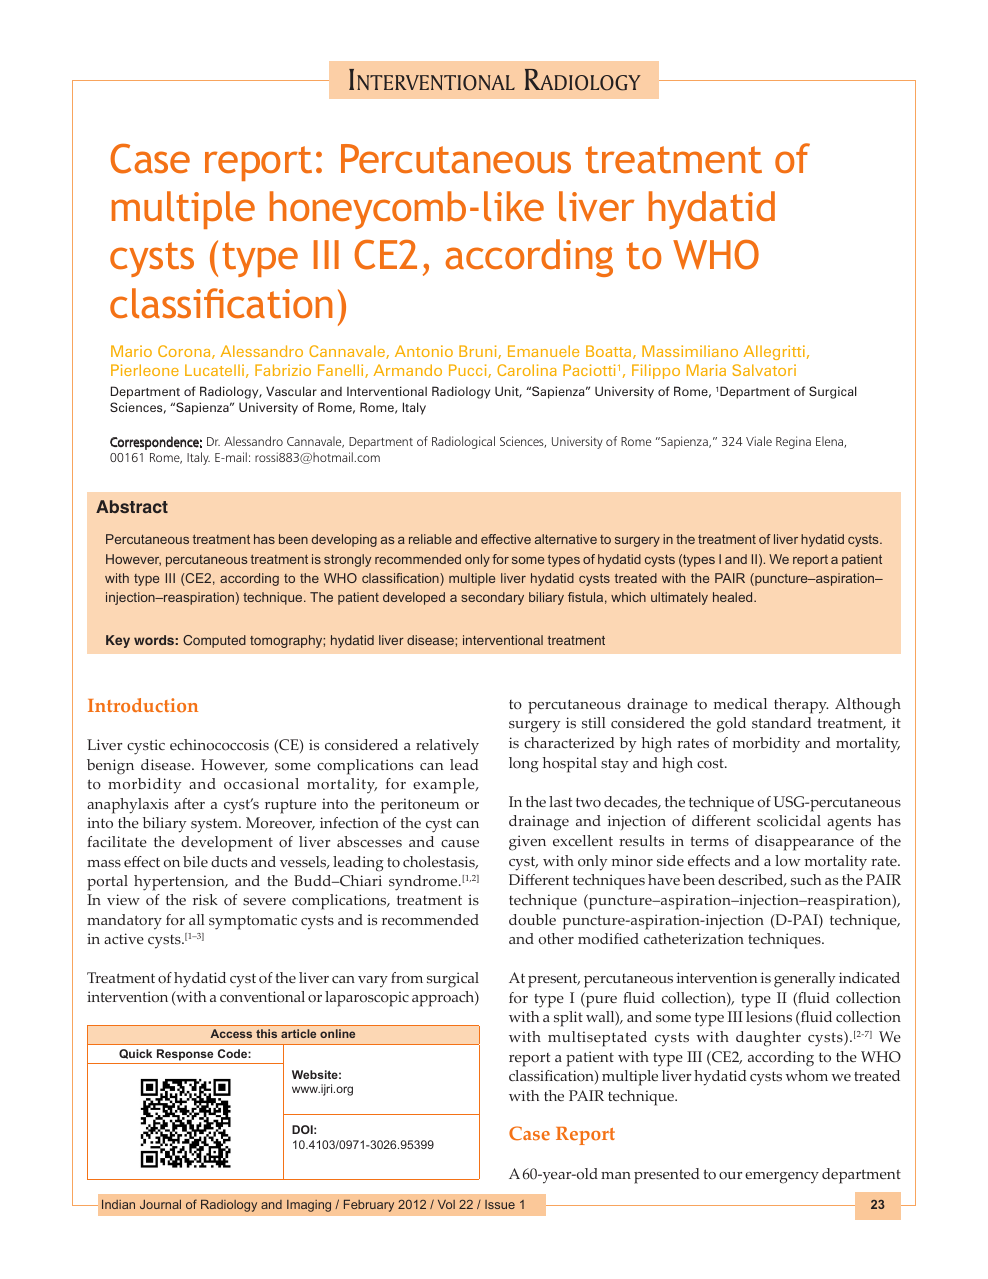 Case Report Percutaneous Treatment Of Multiple Honeycomb Like Liver Hydatid Cysts Type Iii Ce2 According To Who Classification Topic Of Research Paper In Clinical Medicine Download Scholarly Article Pdf And Read For